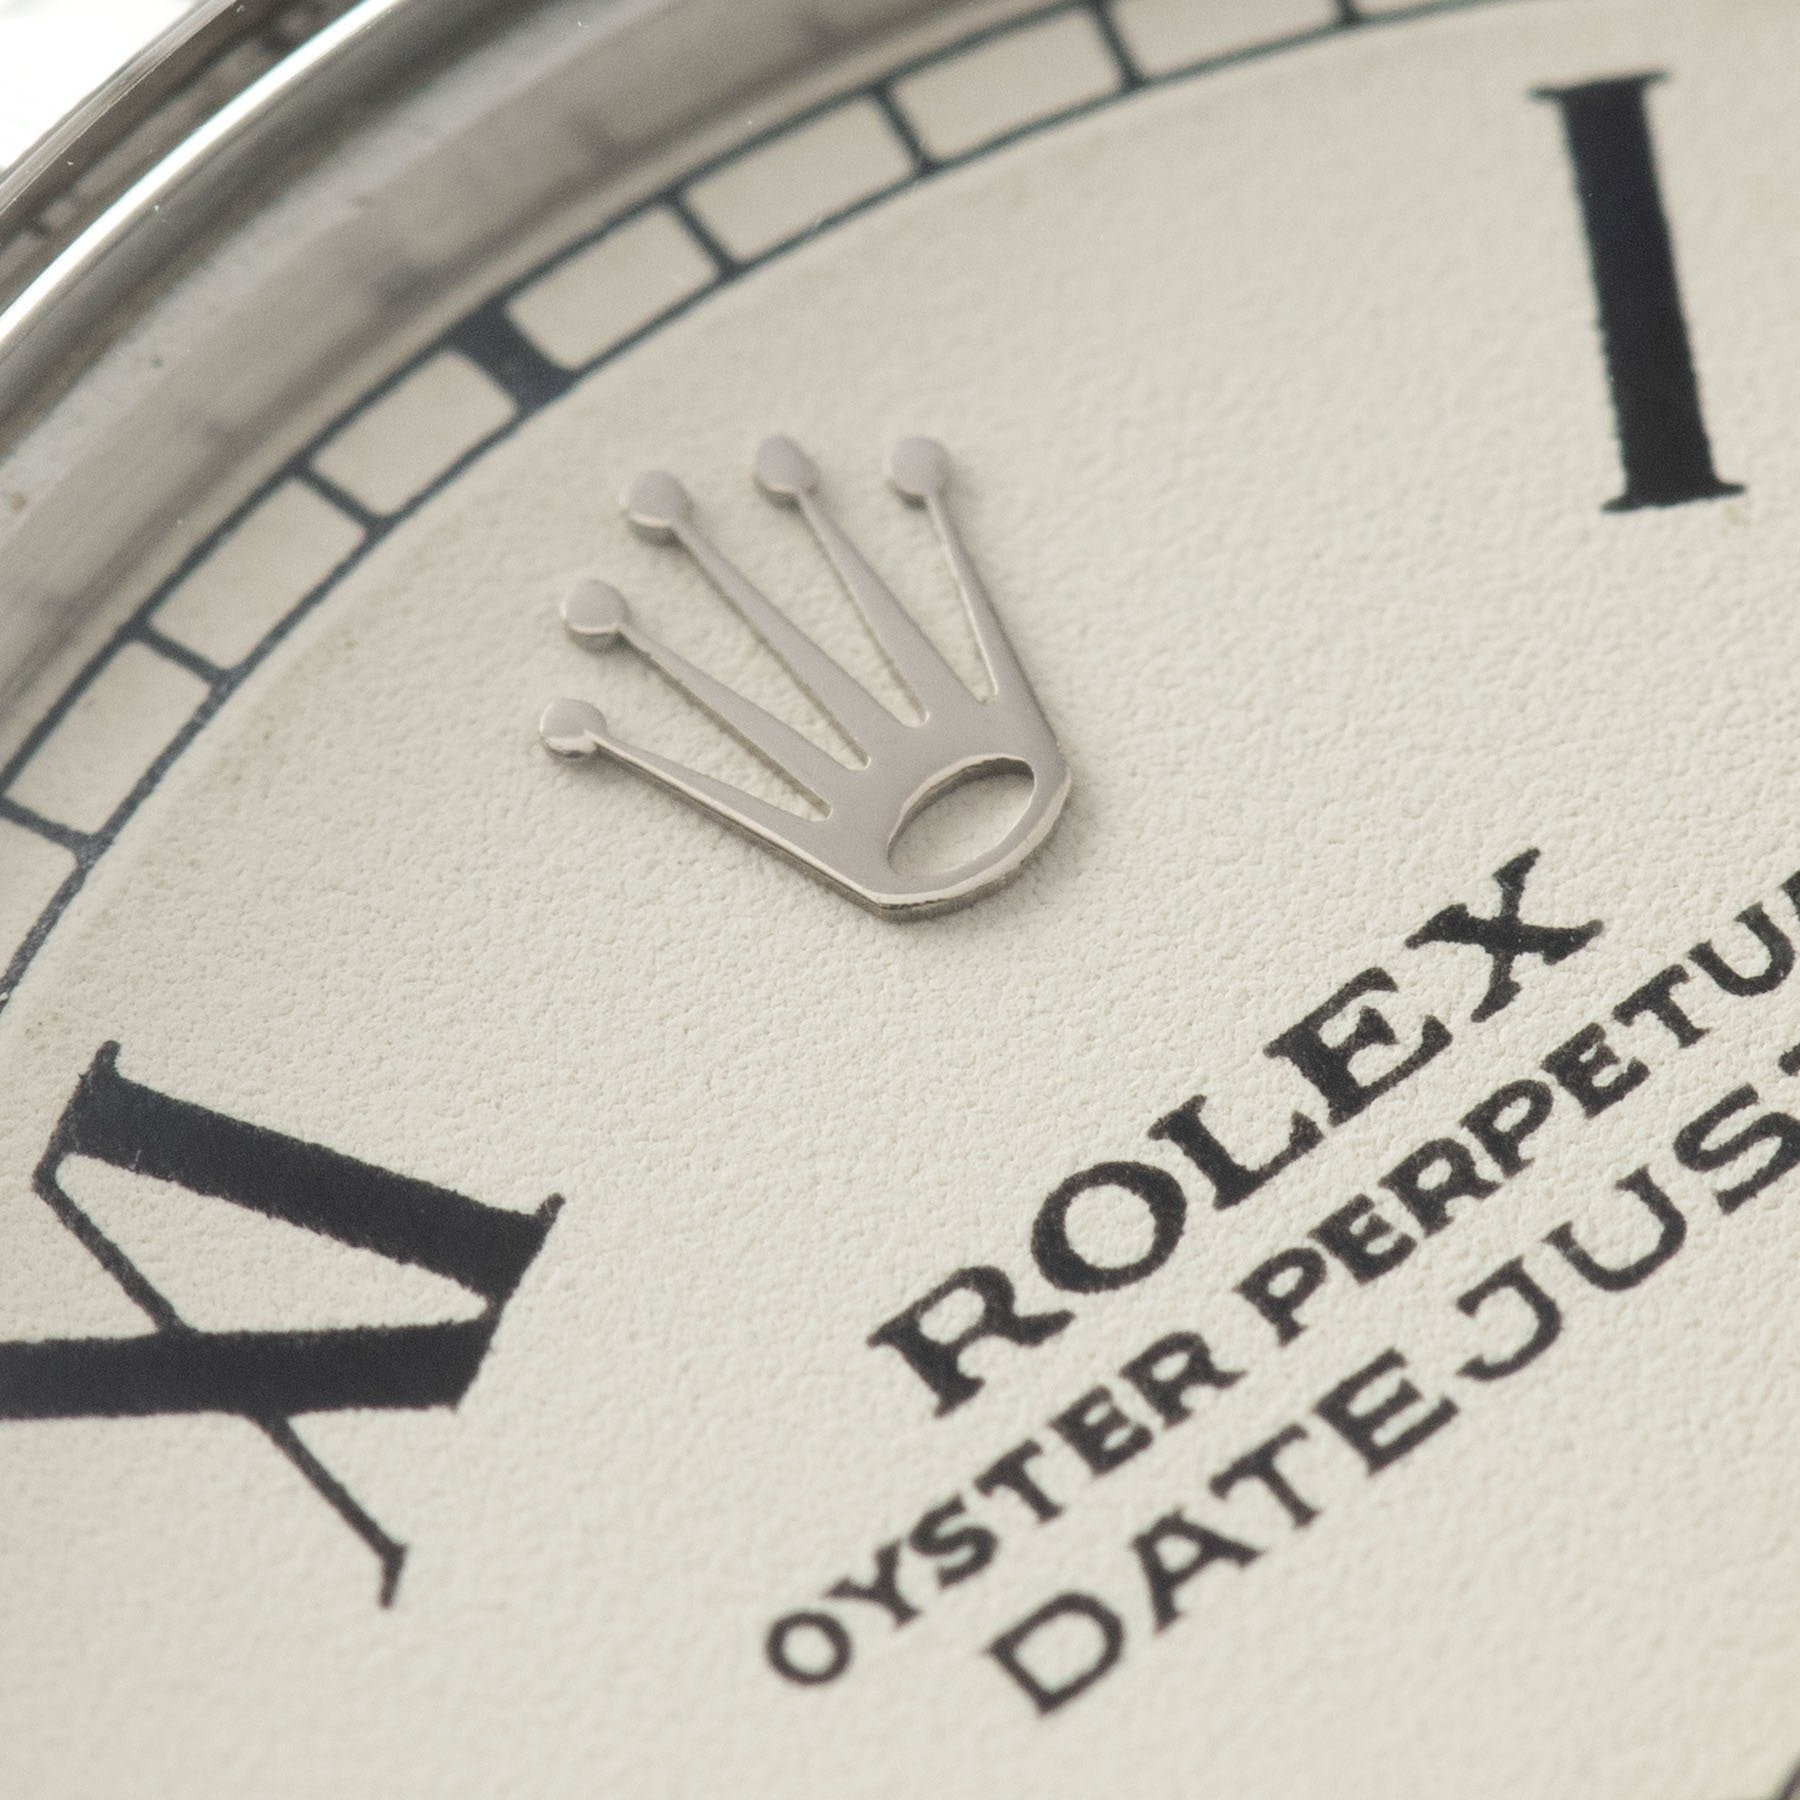 Rolex Datejust Reference 1603 Cream Buckley Dial